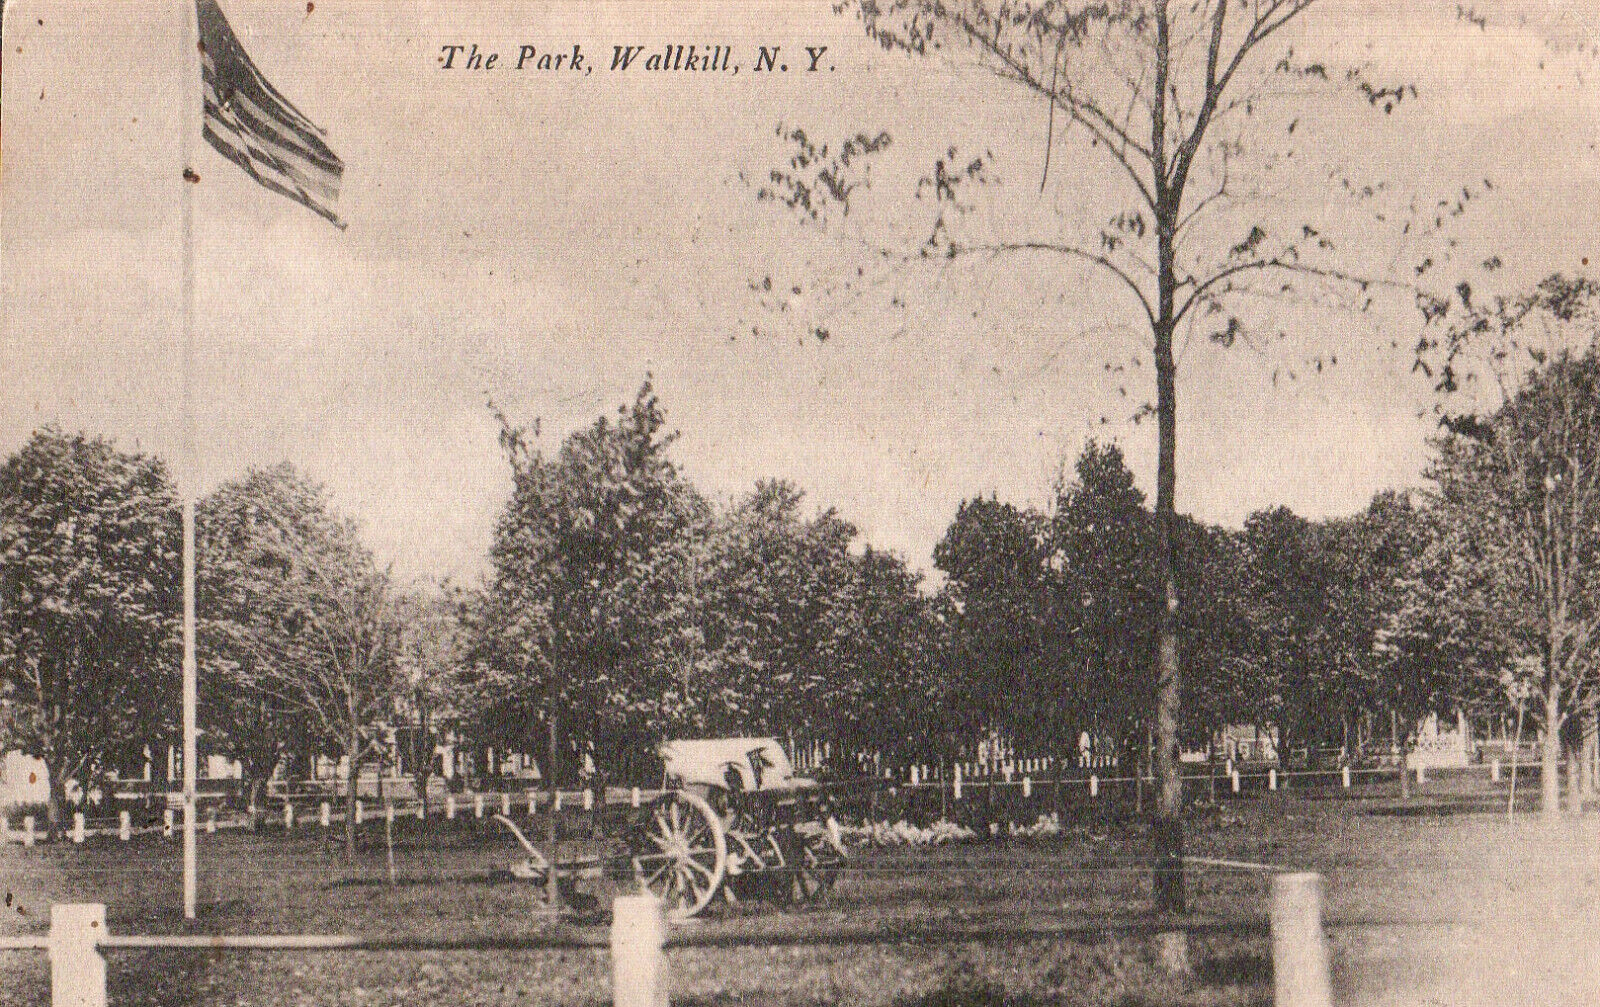 WALLKILL New York NY 1921 Park with American Flag & Cannon Orig VTG POSTCARD